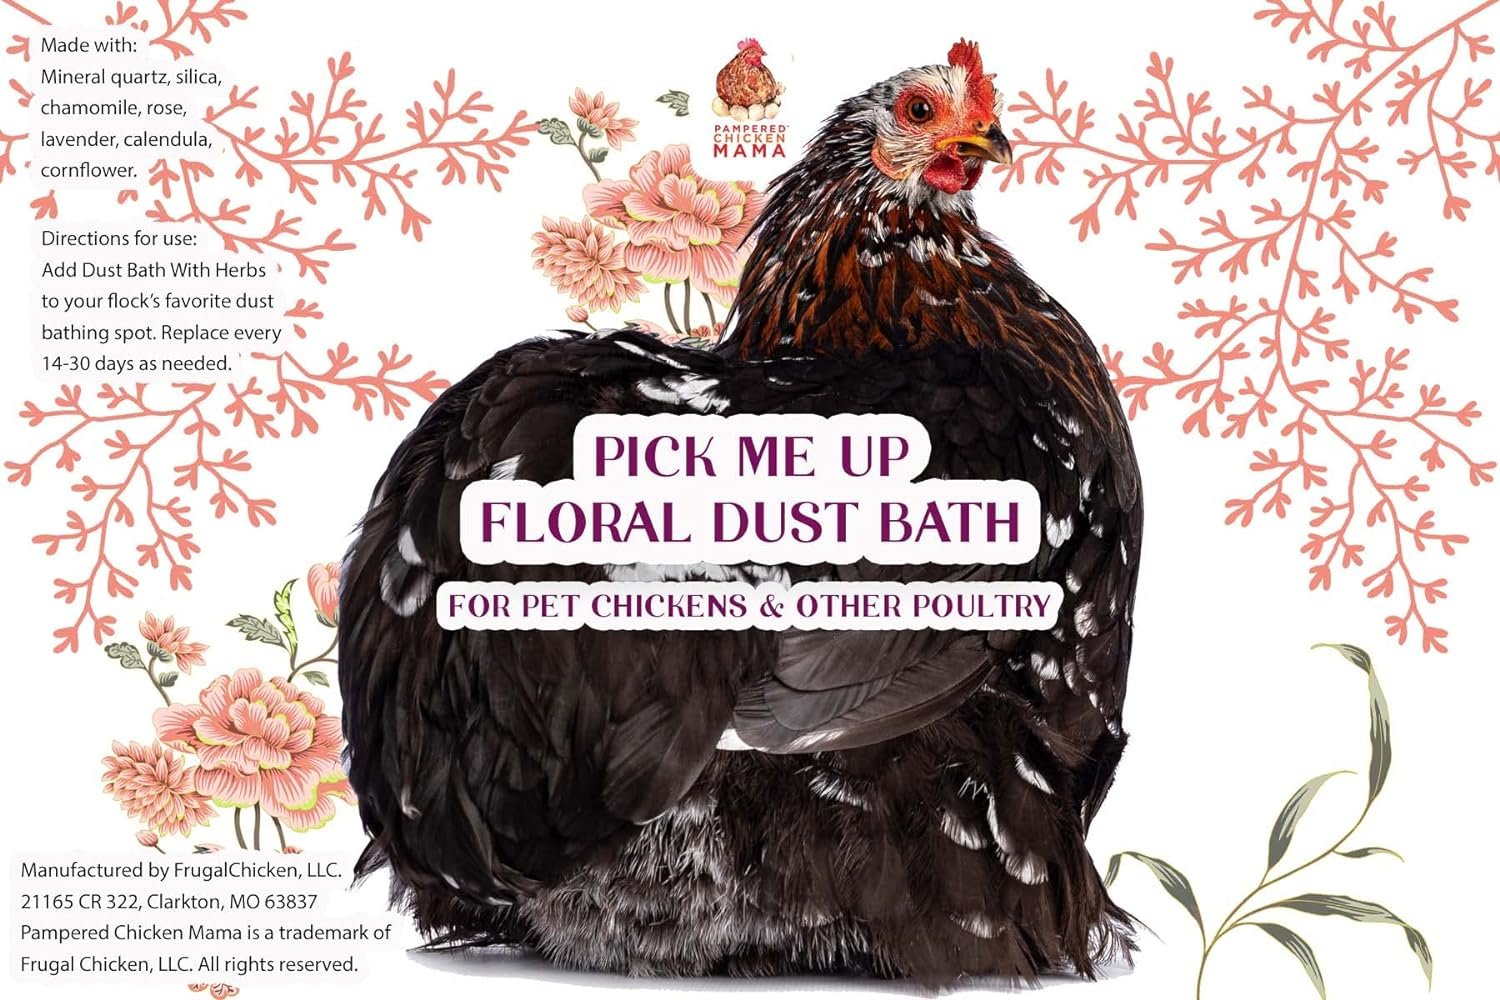 Pampered Chicken Mama Floral Dust Bath with Non-GMO Herbs: All Natural Poultry Supplies for Hens Who Love Bathing in Chicken Coops - Pick Me Up Floral Dust Bath (5 pounds)